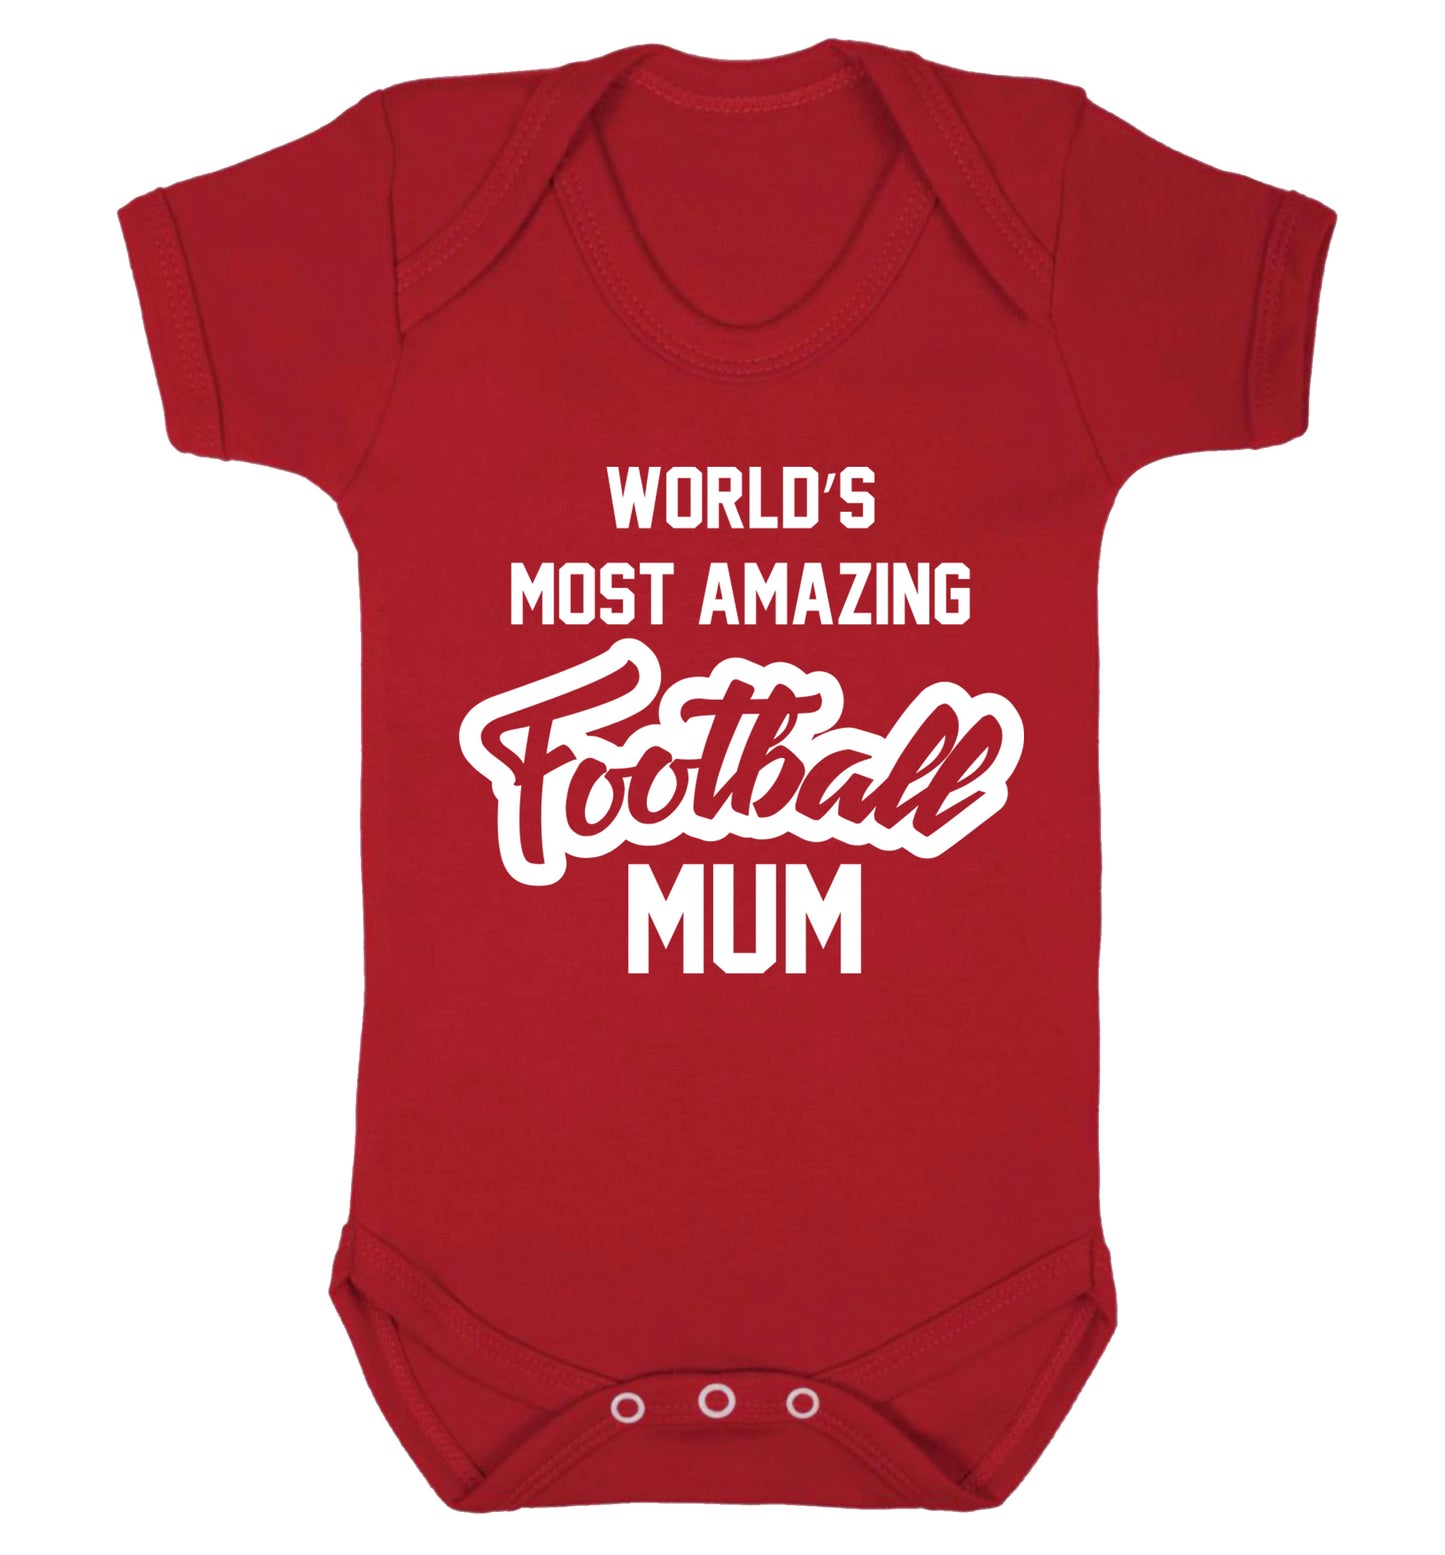 Worlds most amazing football mum Baby Vest red 18-24 months